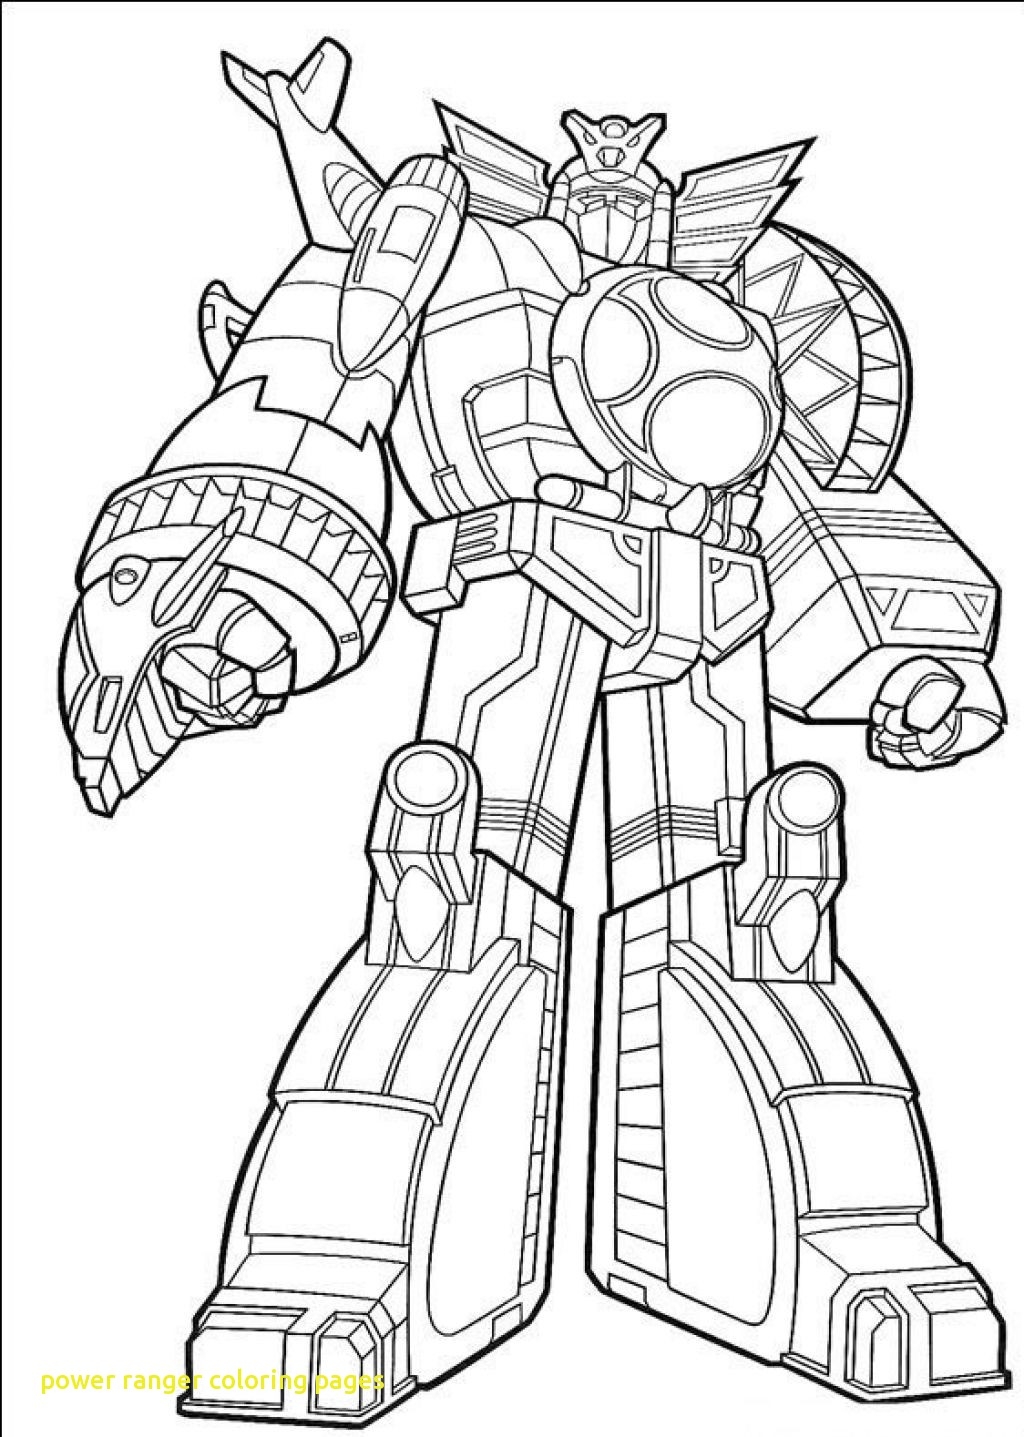 pages coloring ~ Megazord Coloring Pages At Getdrawings Com Free ...